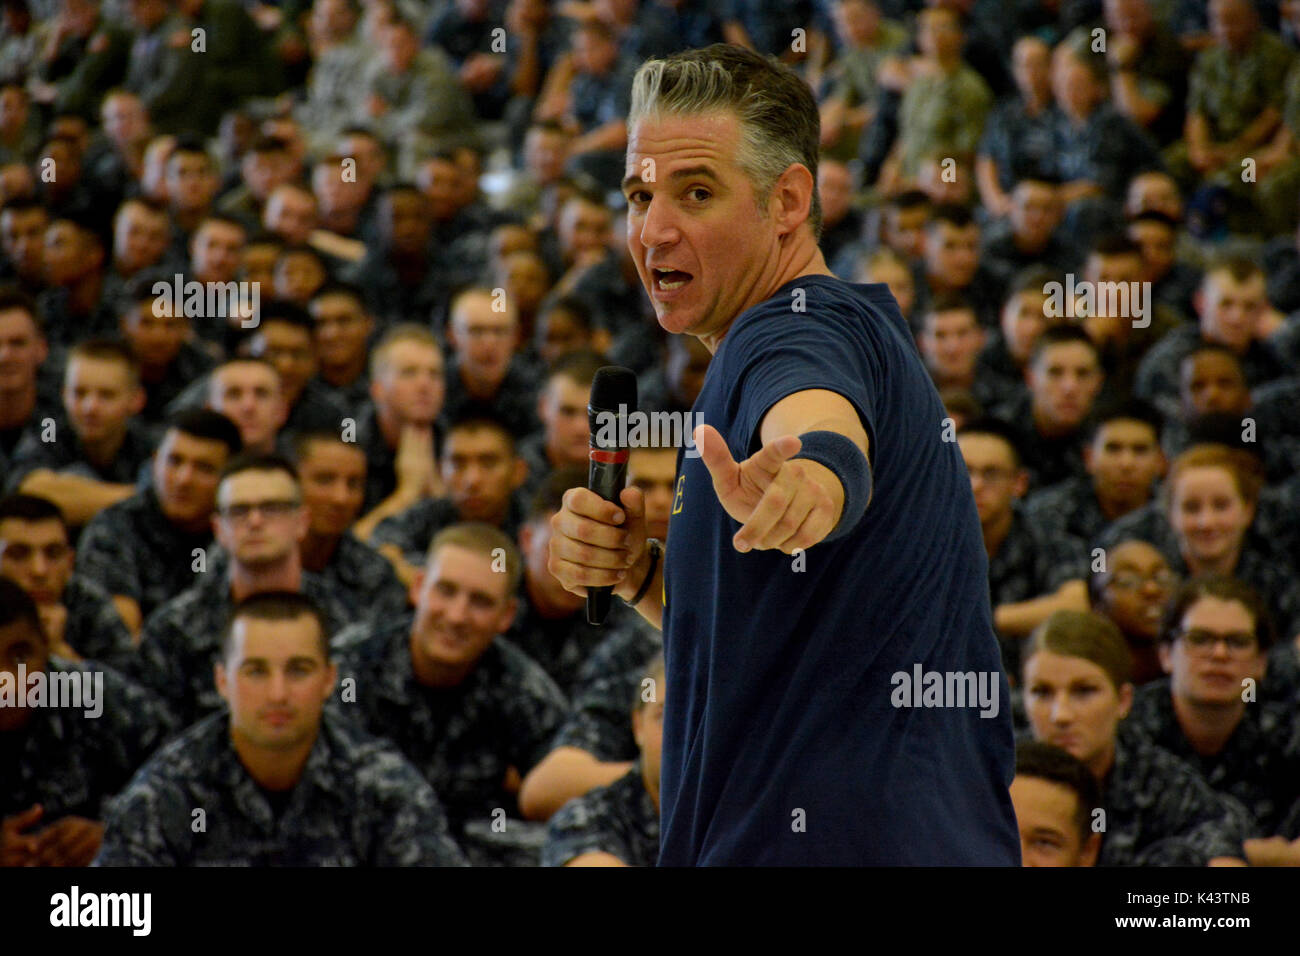 Motivational speaker Jeremy Bates performs his Hope Dealer act to junior U.S. Marines, sailors, and U.S. Air Force students at the Naval Air Station Pensacola Charles Taylor Hangar August 23, 2017 in Pensacola, Florida.  (photo by Bruce Cummins via Planetpix) Stock Photo